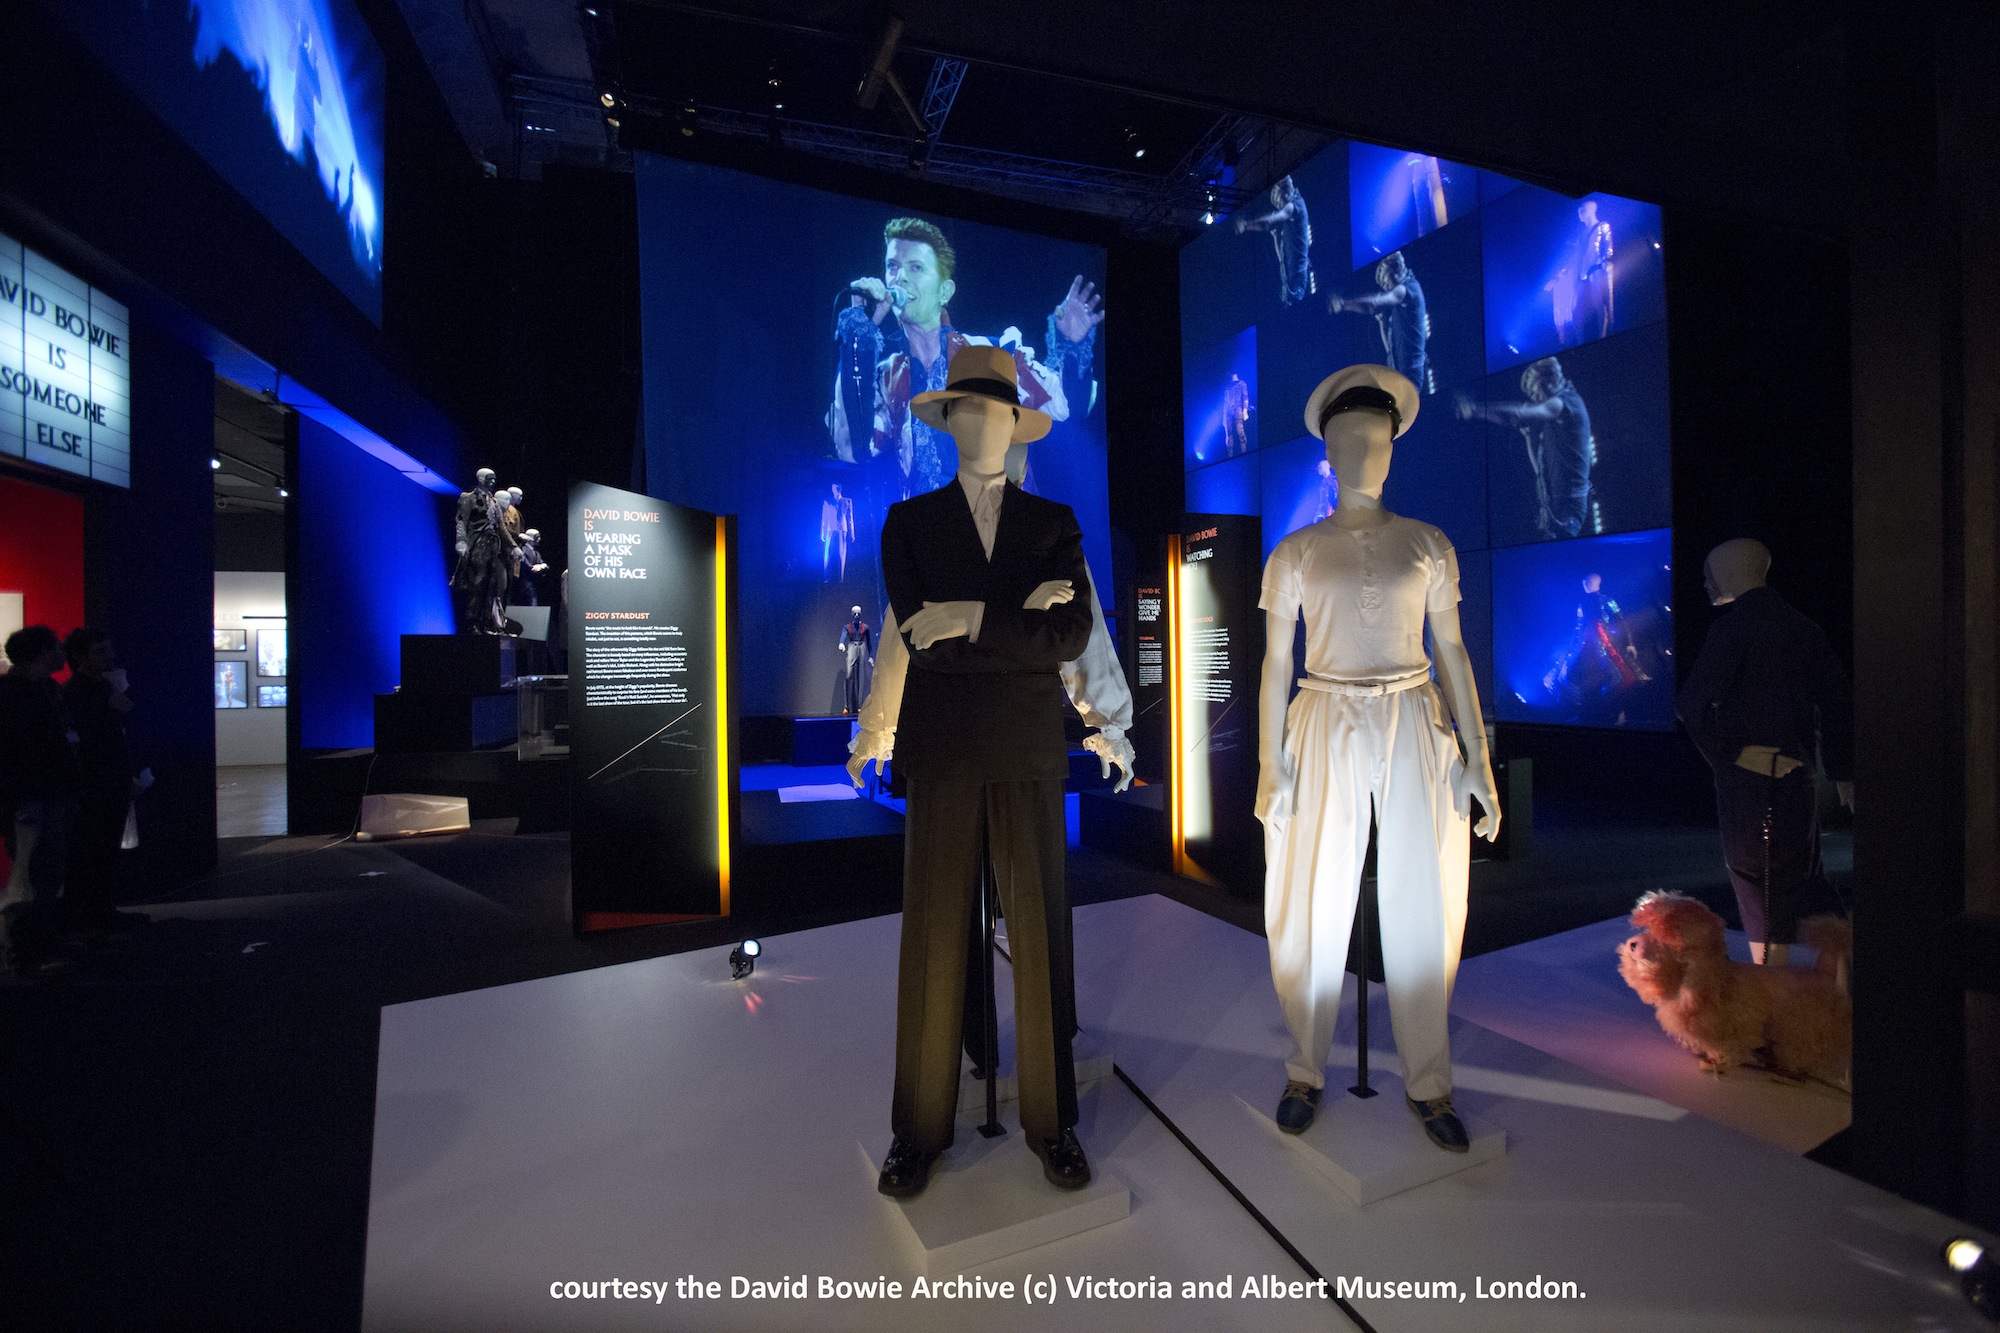 Installation Shot of David Bowie is courtesy David Bowie Archive (c)Victoria and Albert Museum,London(8)